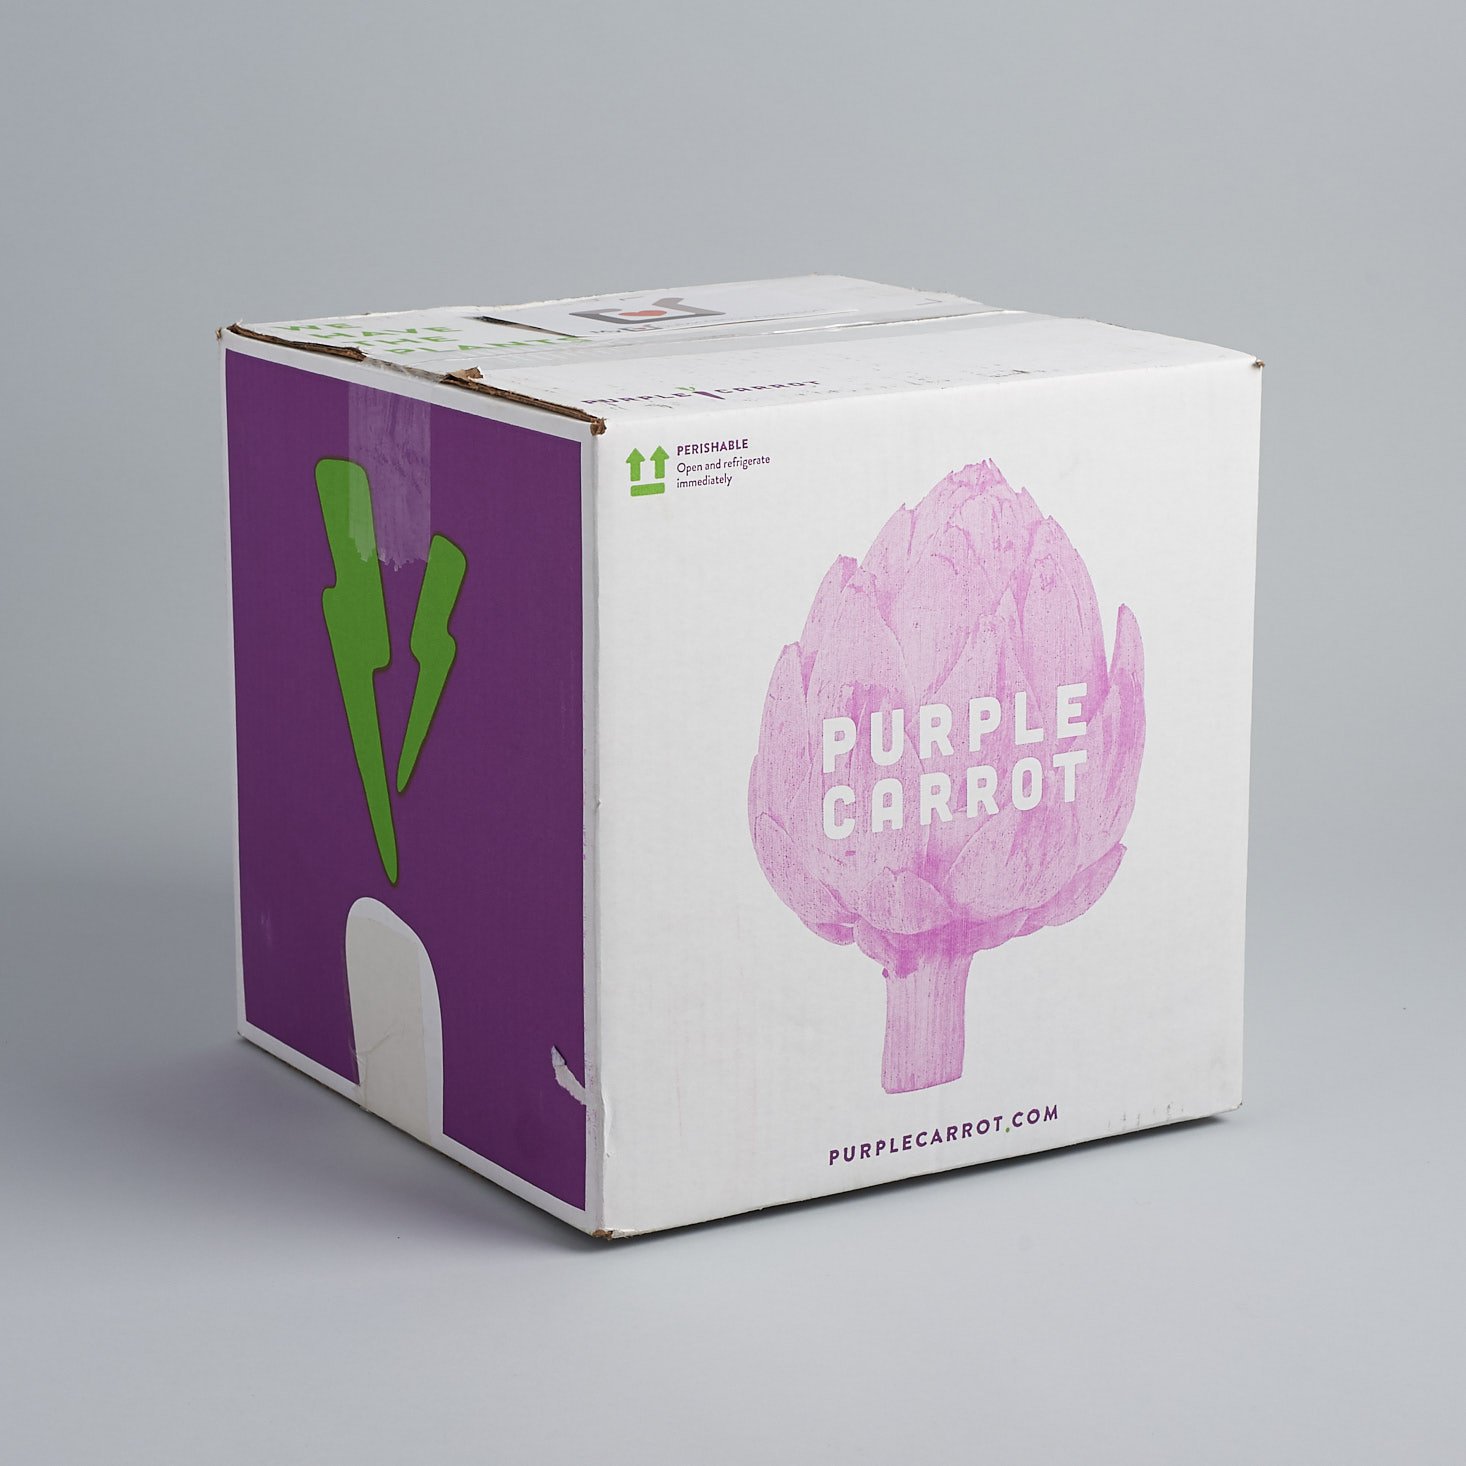 Purple Carrot Vegan Meal Kit Subscription Box Review + Coupon – May 2018